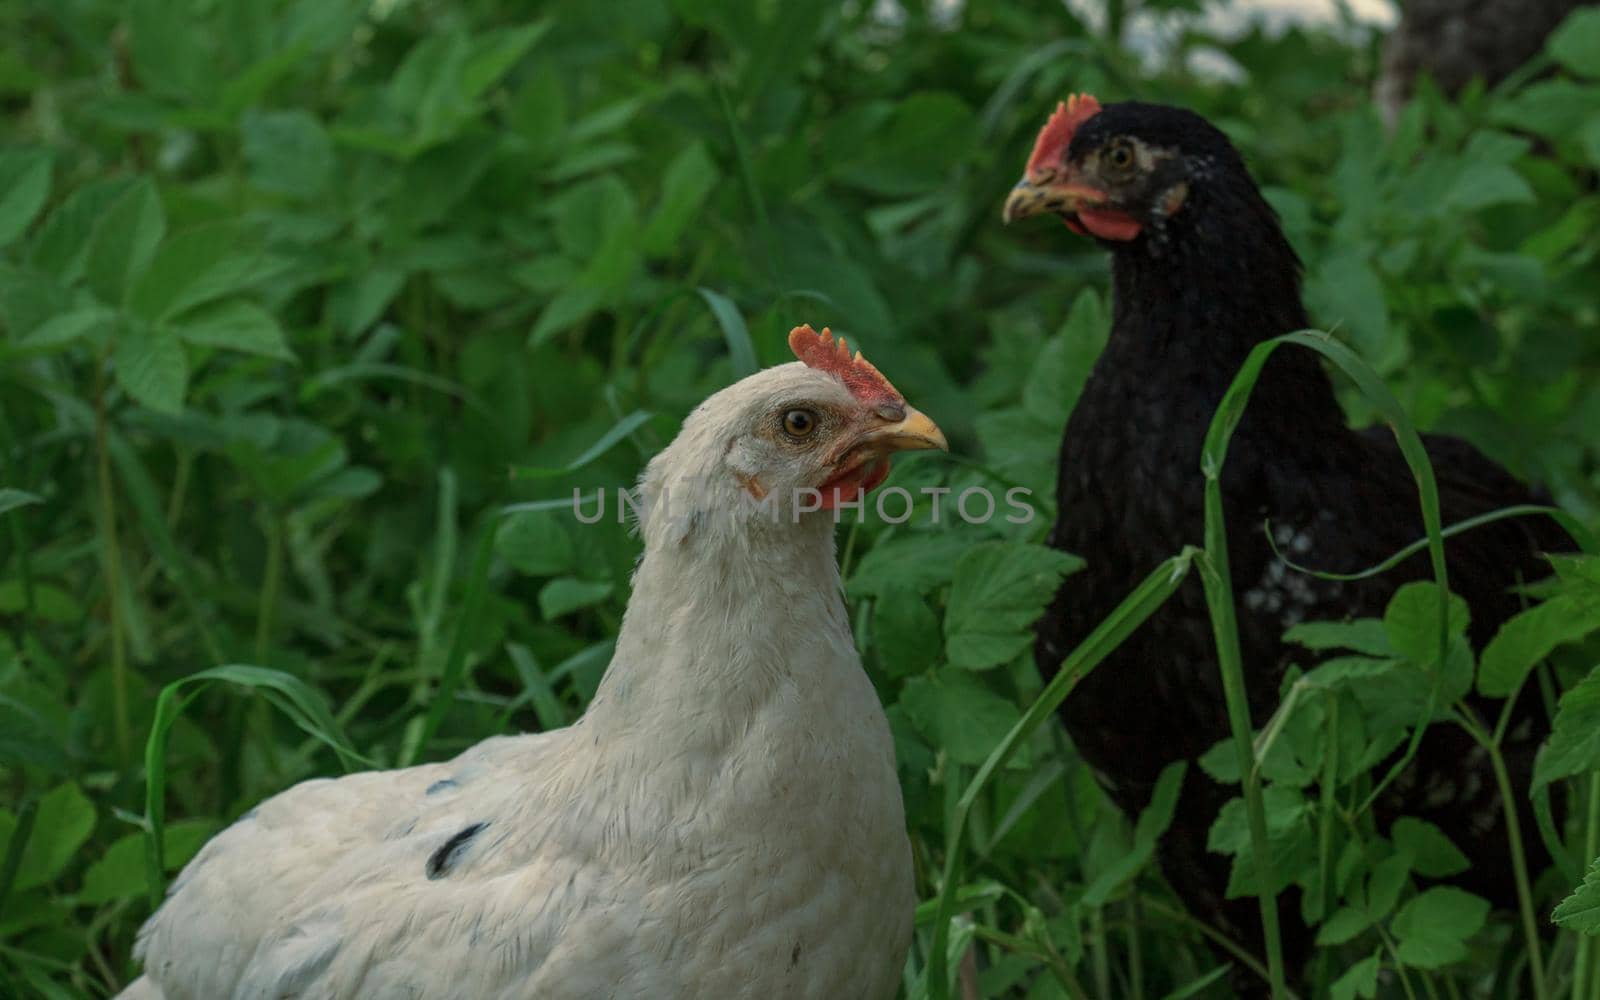 Wild farm two chickens birds in green grass looking for food